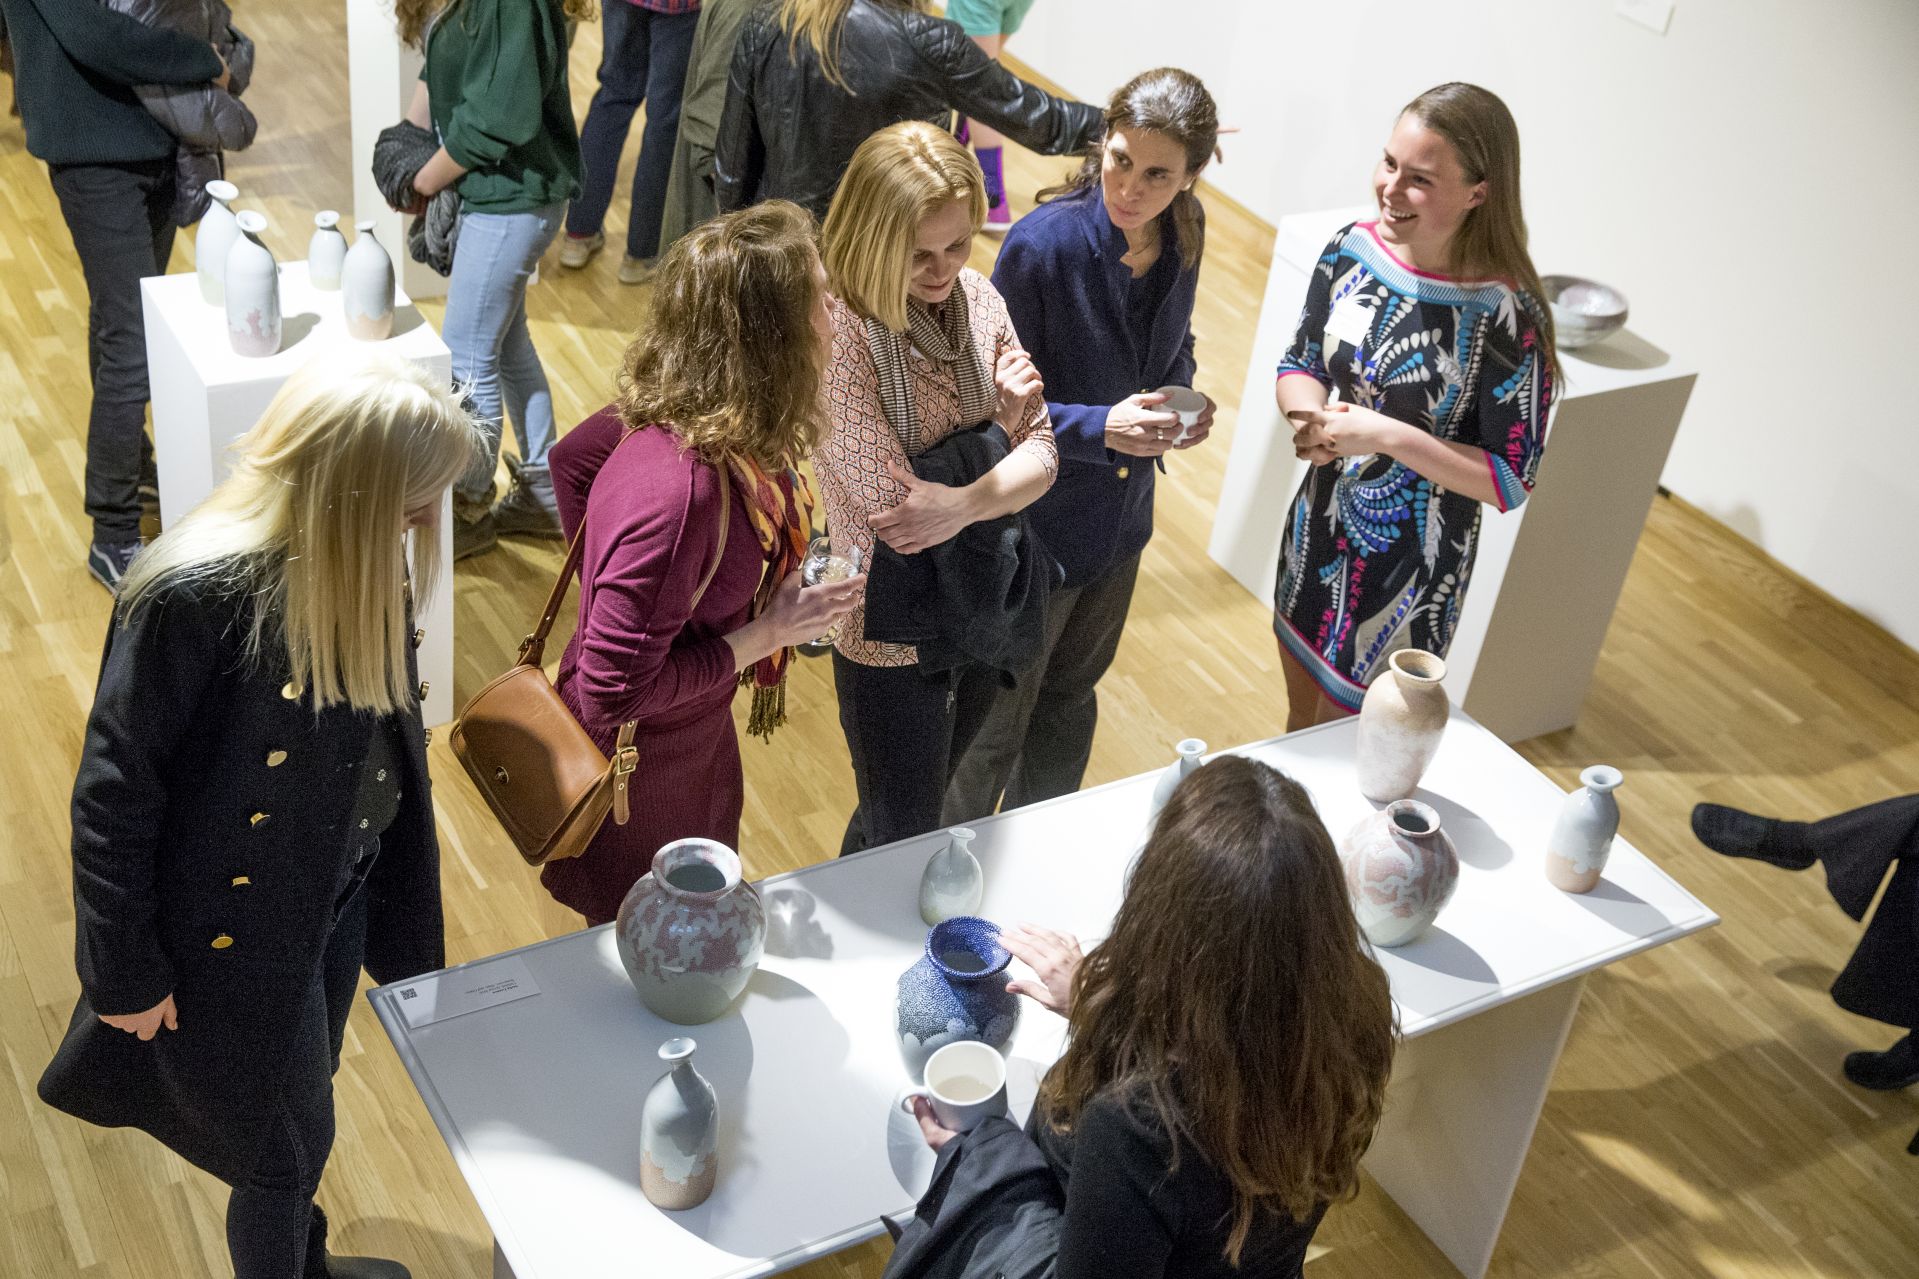 The 2016 Senior Thesis Exhibition and reception at the Bates College Museum of Art is filled with beautiful work and excited visitors The artists will be there to greet you! "Someone came in here and looked at our stuff and said 'you guys are really vibing off of each other.'"-- Sasha Lennon '16 of Cape Elizabeth, a double major in studio art and psychology (left) and Natalie Silver '16 of Bennington, Vt., a double major in studio art and history, throw pots for the Annual Senior Exhibition in their ground-floor Olin Arts studio. As co-coordinators of the Annual Entering Student Outdoor Program (along with classmate Jordan Cargill), they are close friends who share not only a studio but also an interest in the balance of form and function in their ceramic art. (Phyllis Graber Jensen/ Bates College)